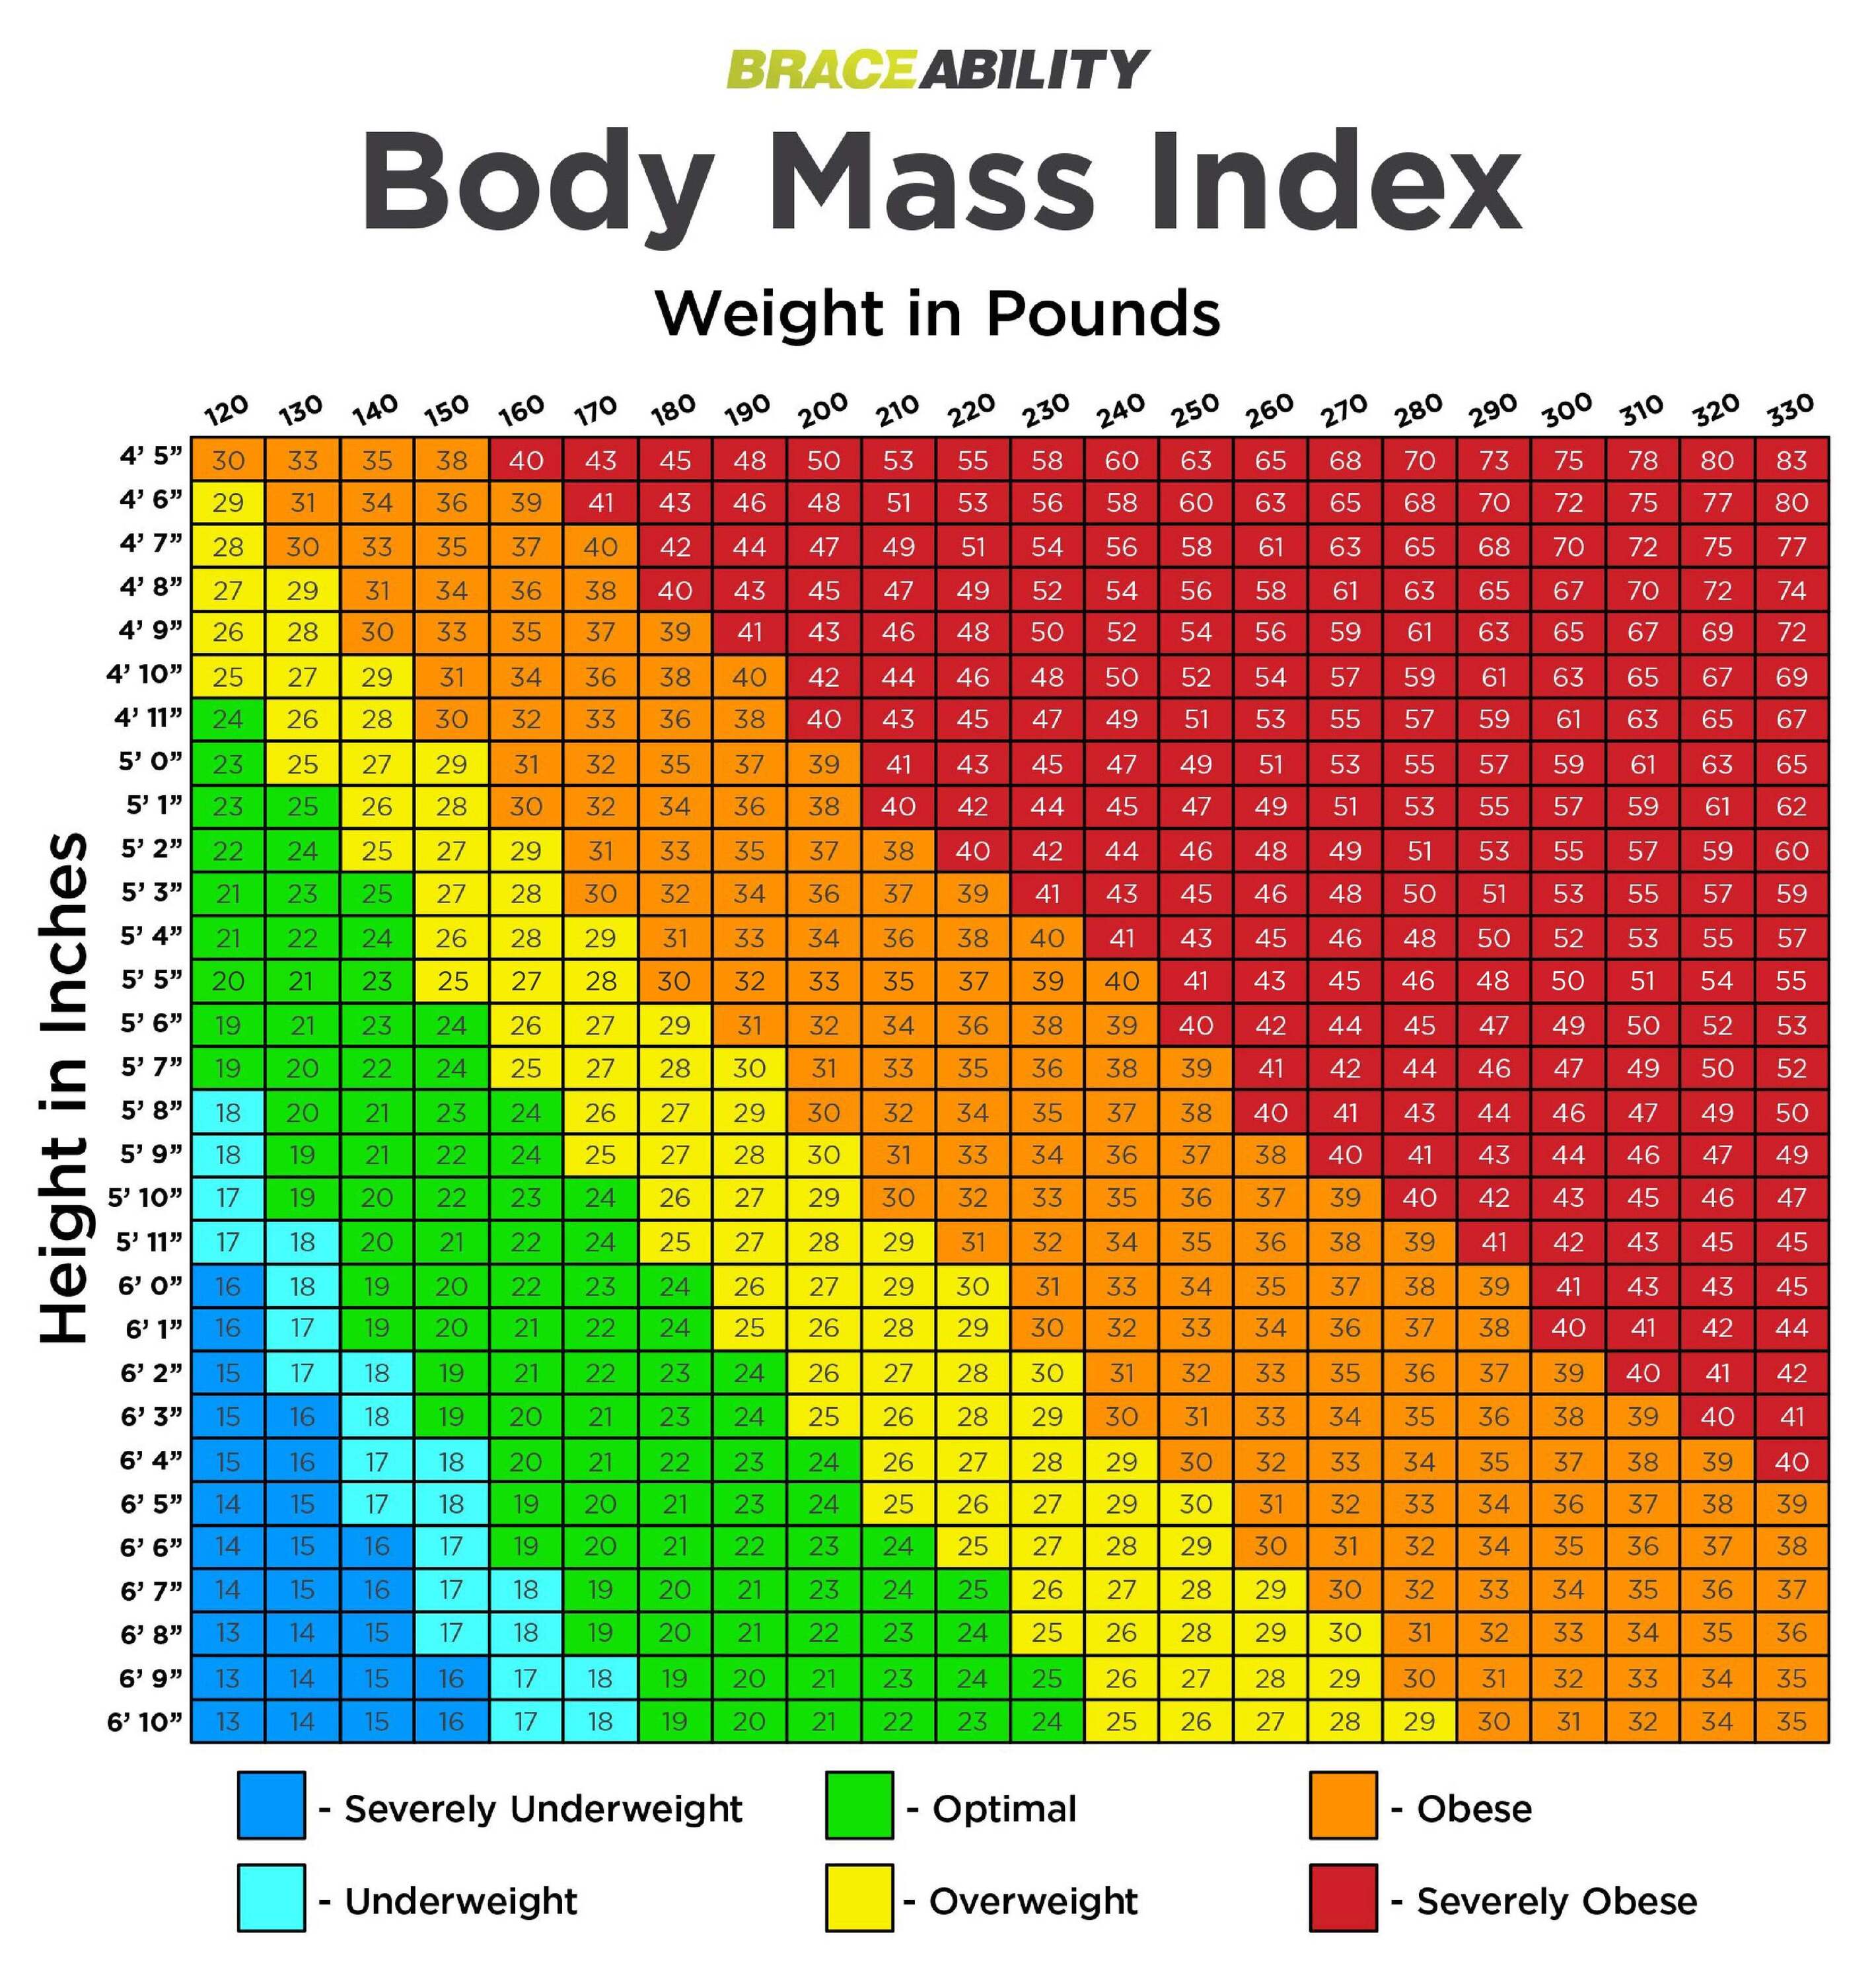 bmi-body-mass-index-for-plus-size-obese-chart.jpg